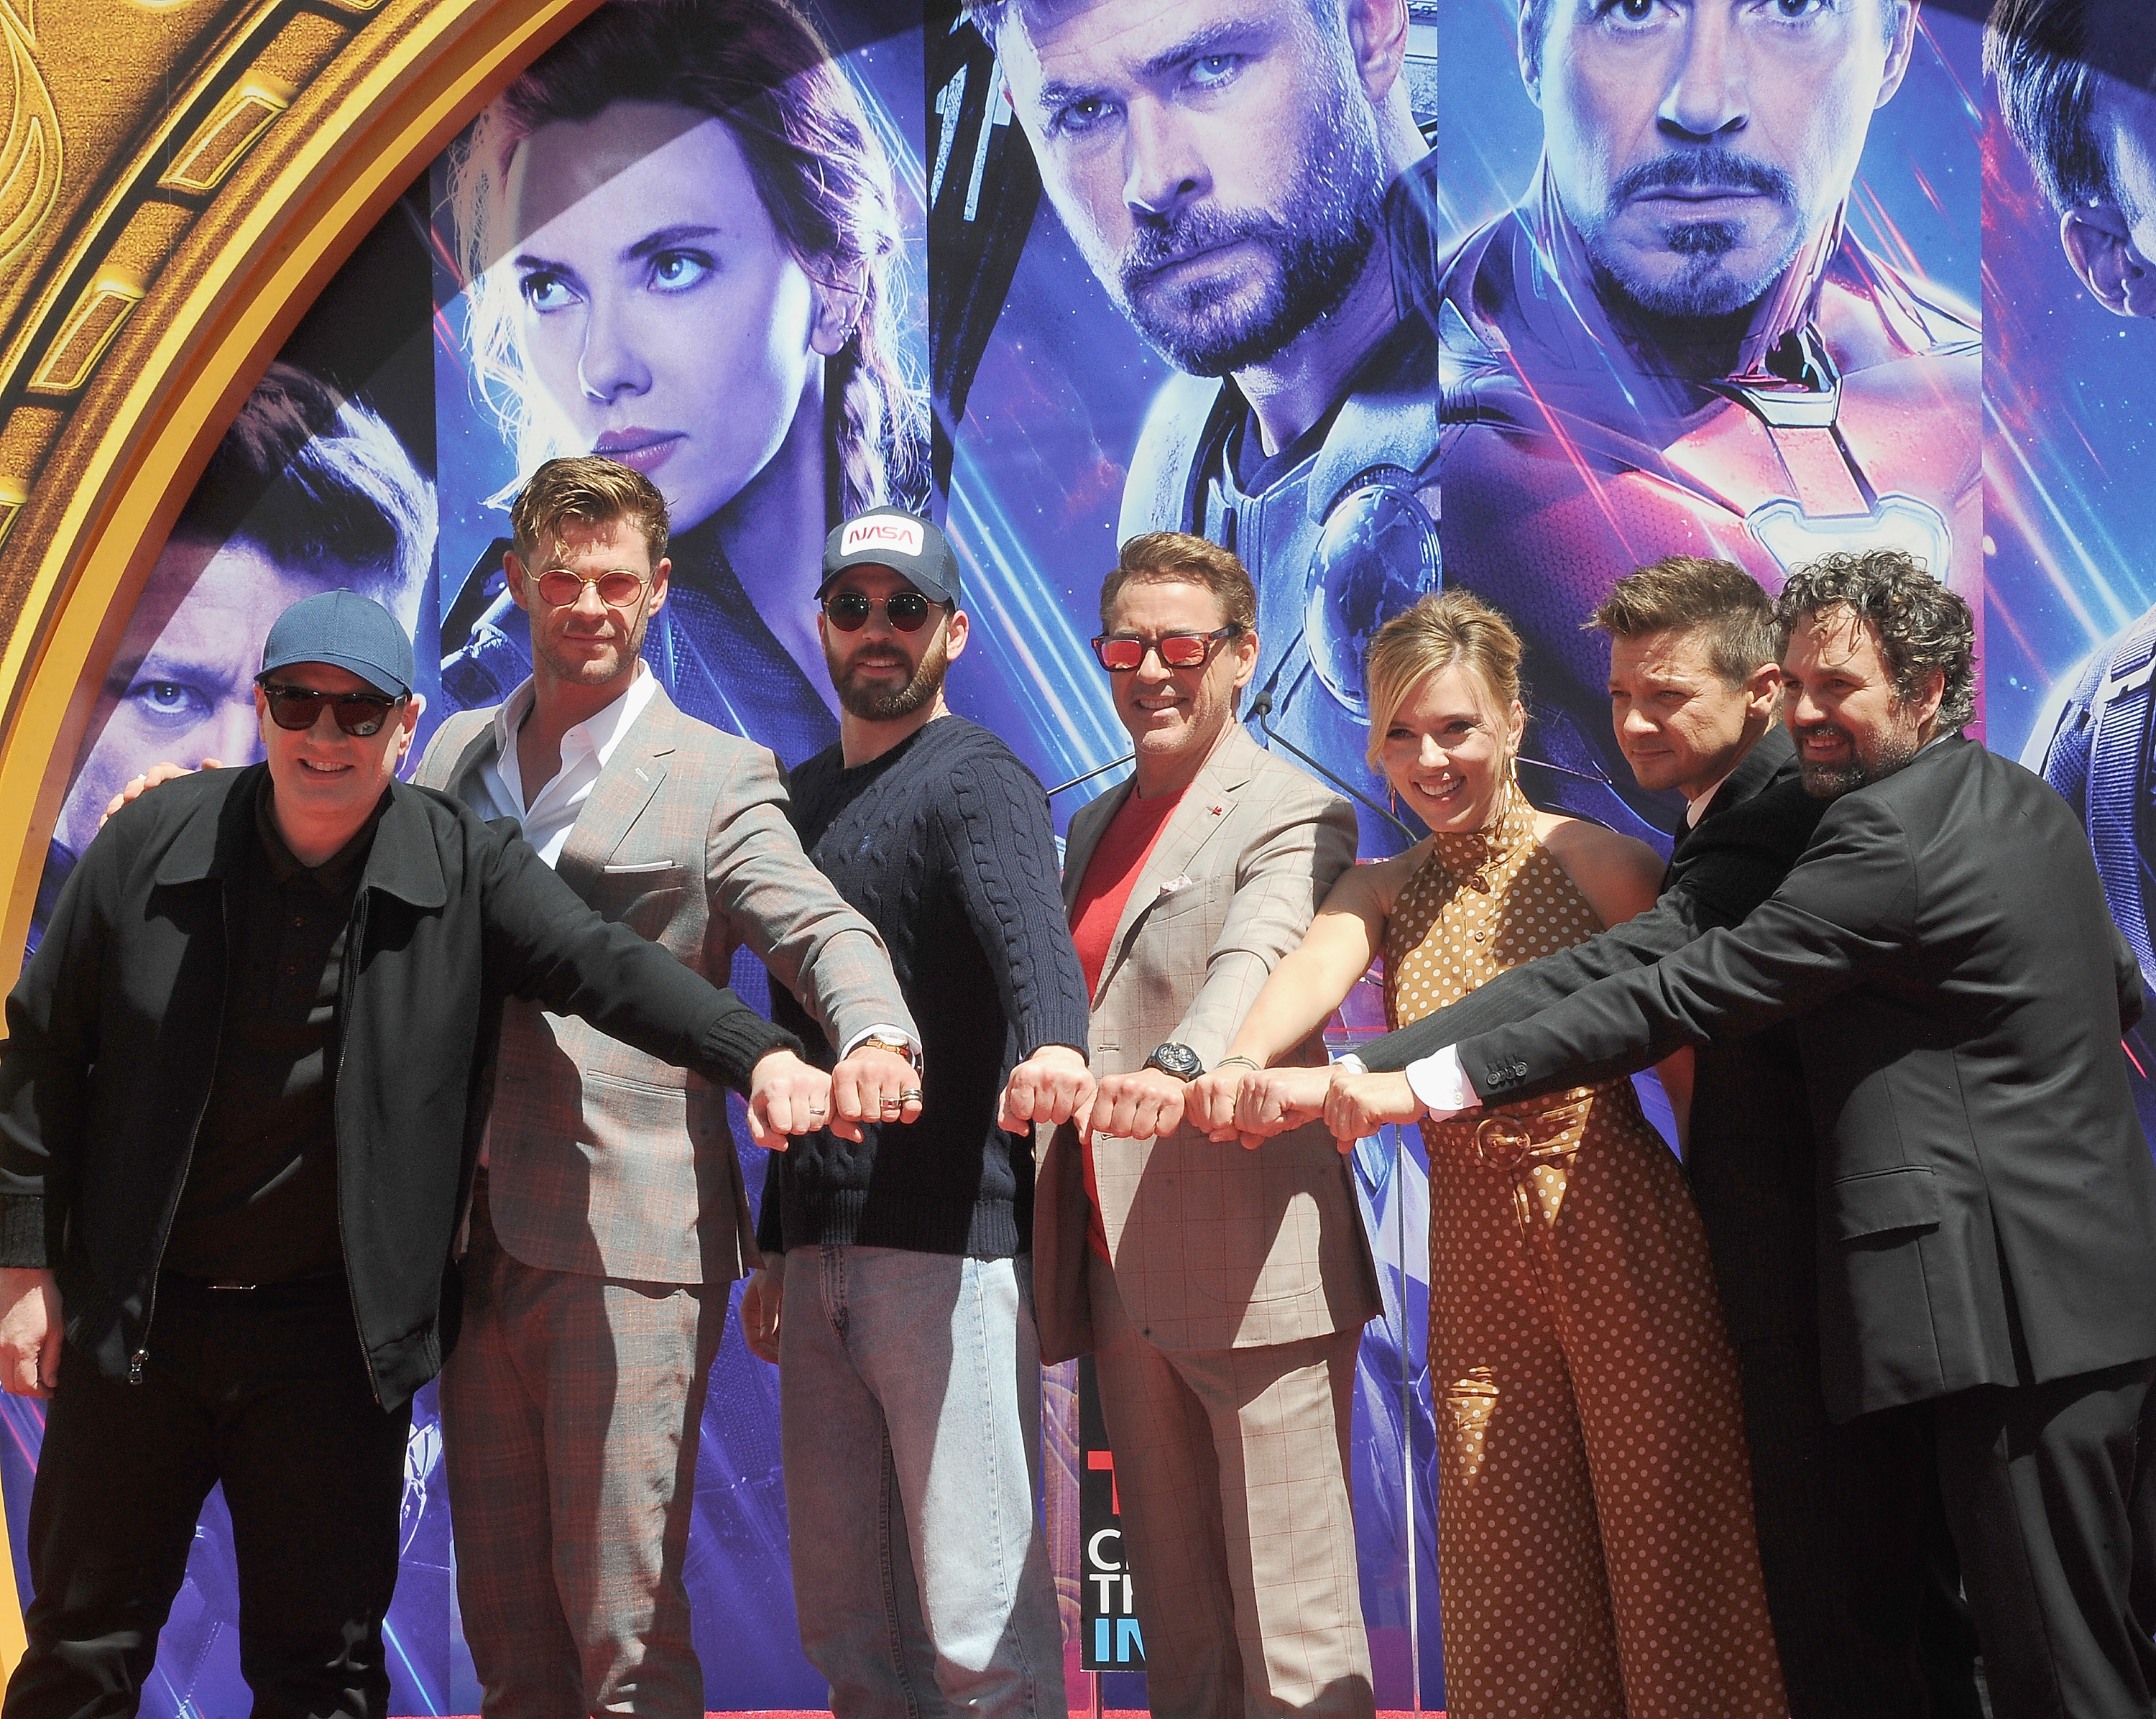 the cast bringing their fists together